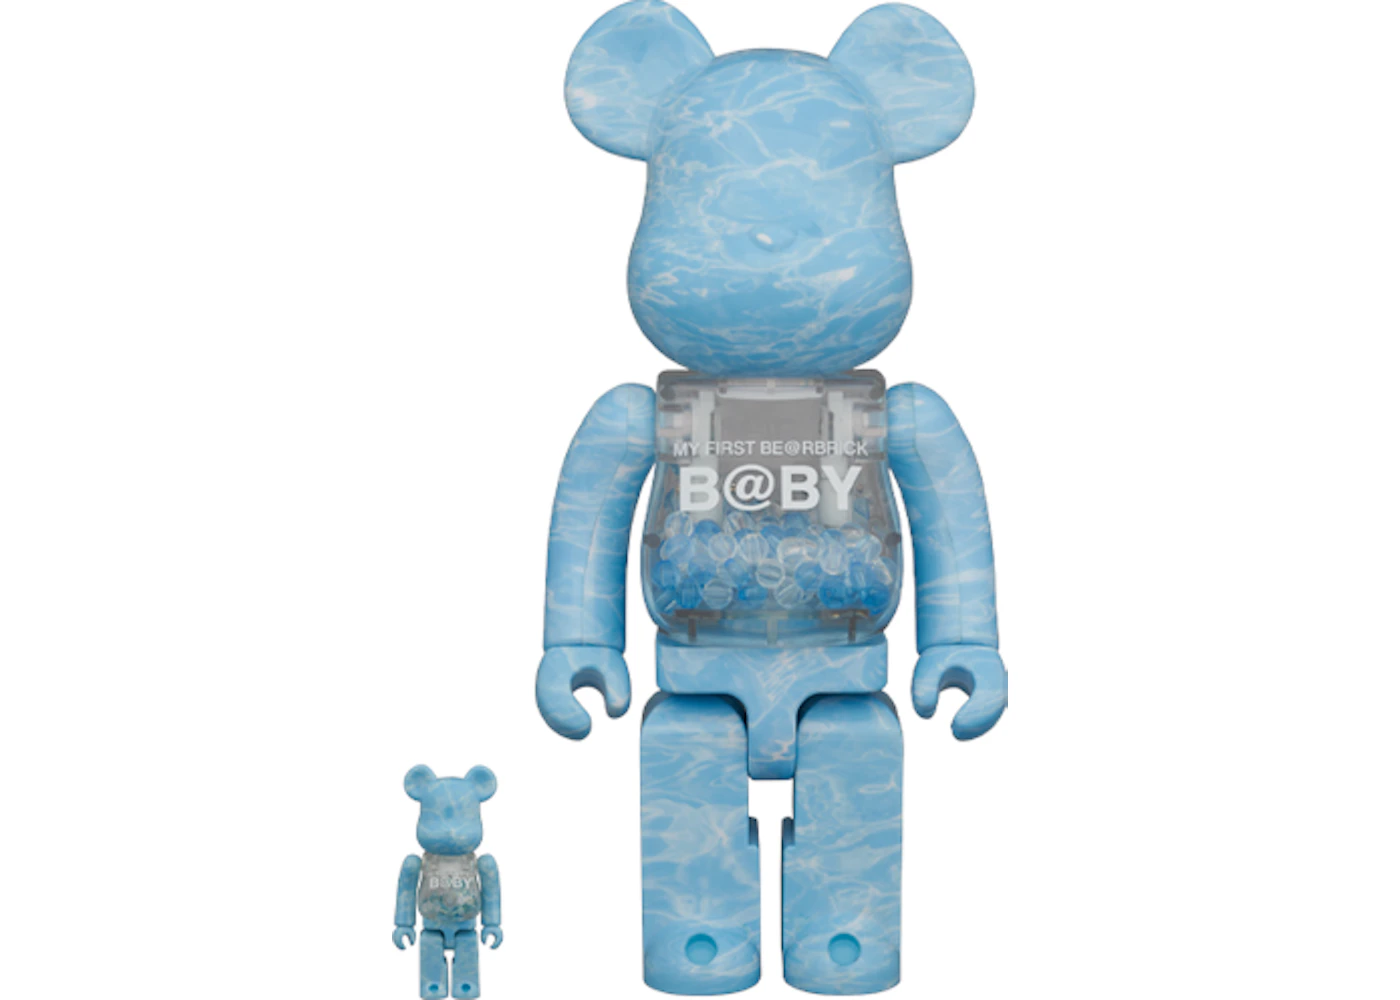 Bearbrick MY FIRST BE @ RBRICK B @ BY WATER CREST Ver. 100% & 400